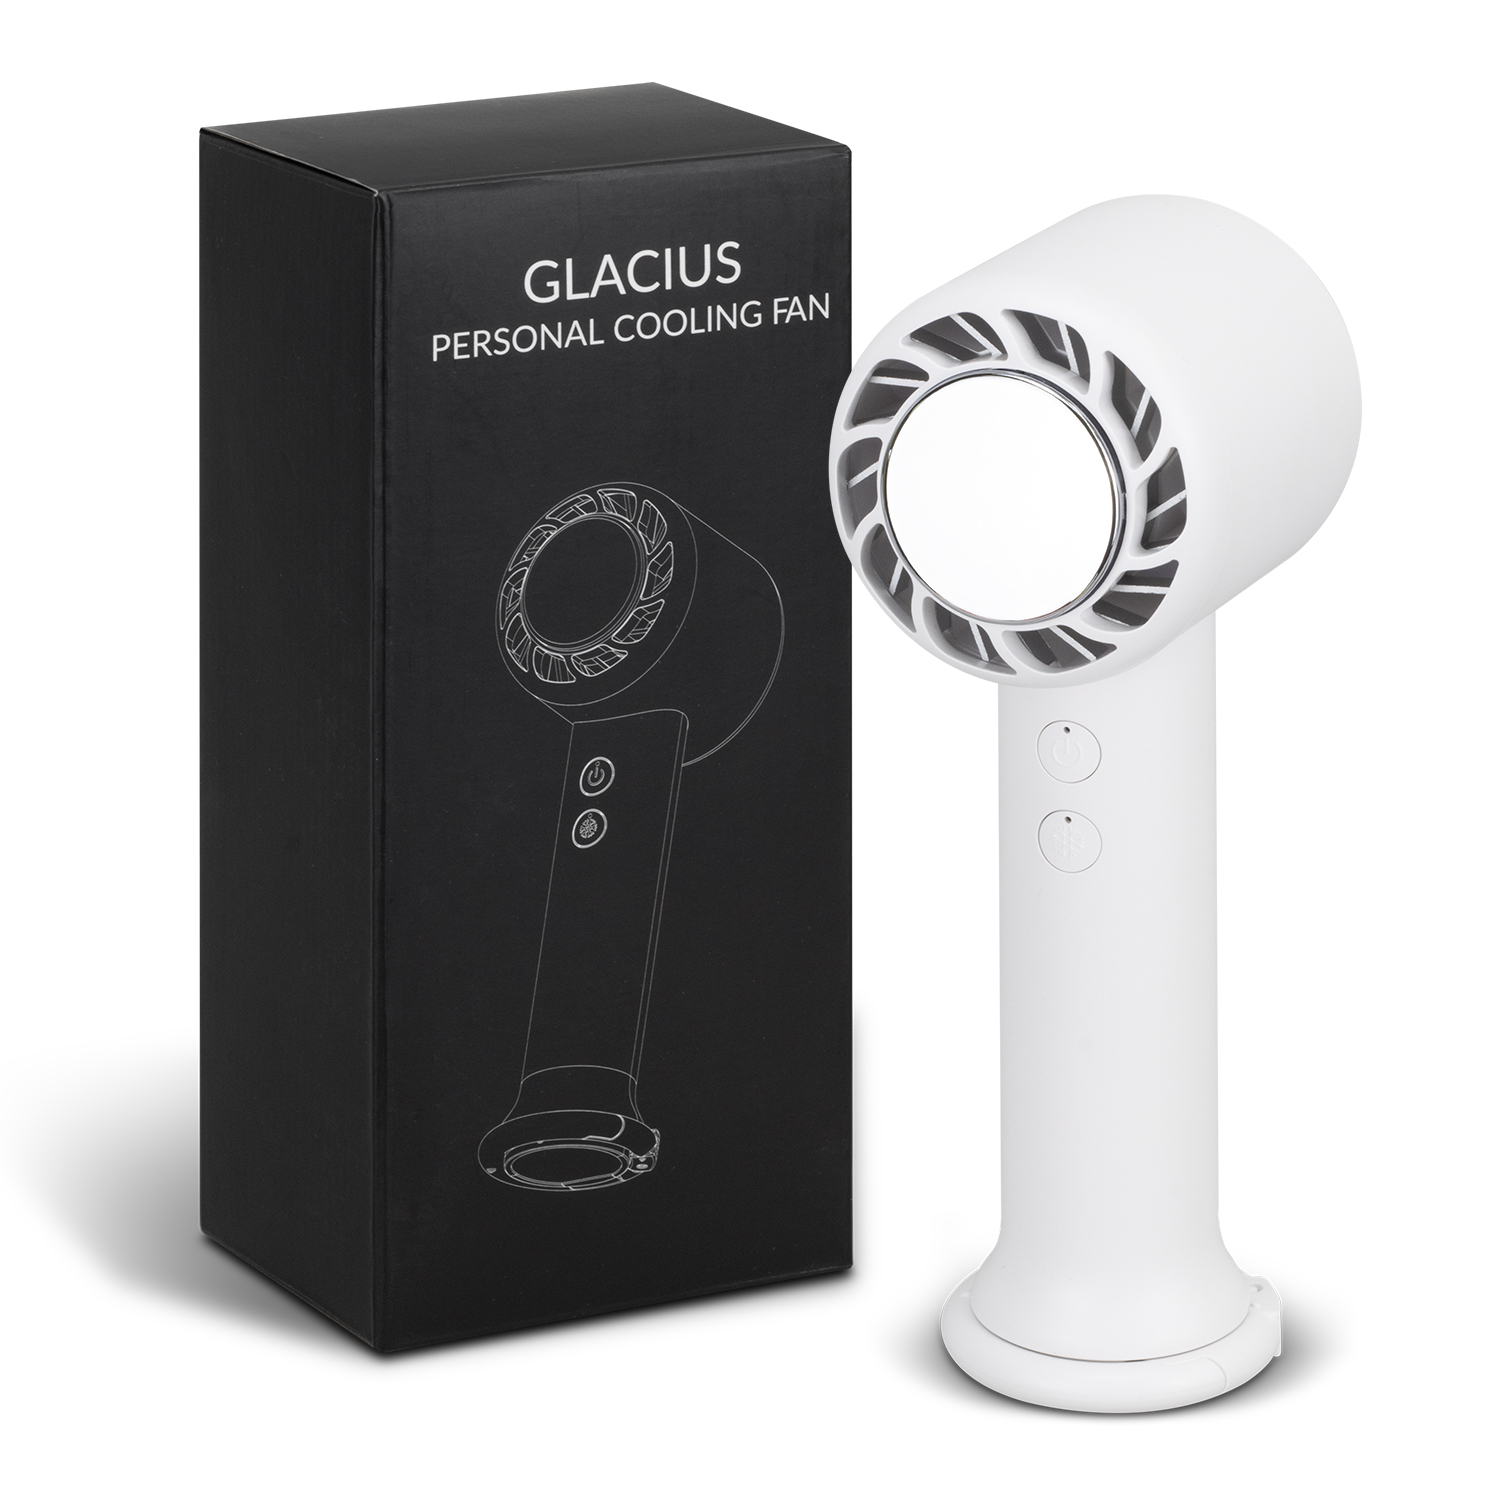 Glacius Personal Cooling Fan 126260